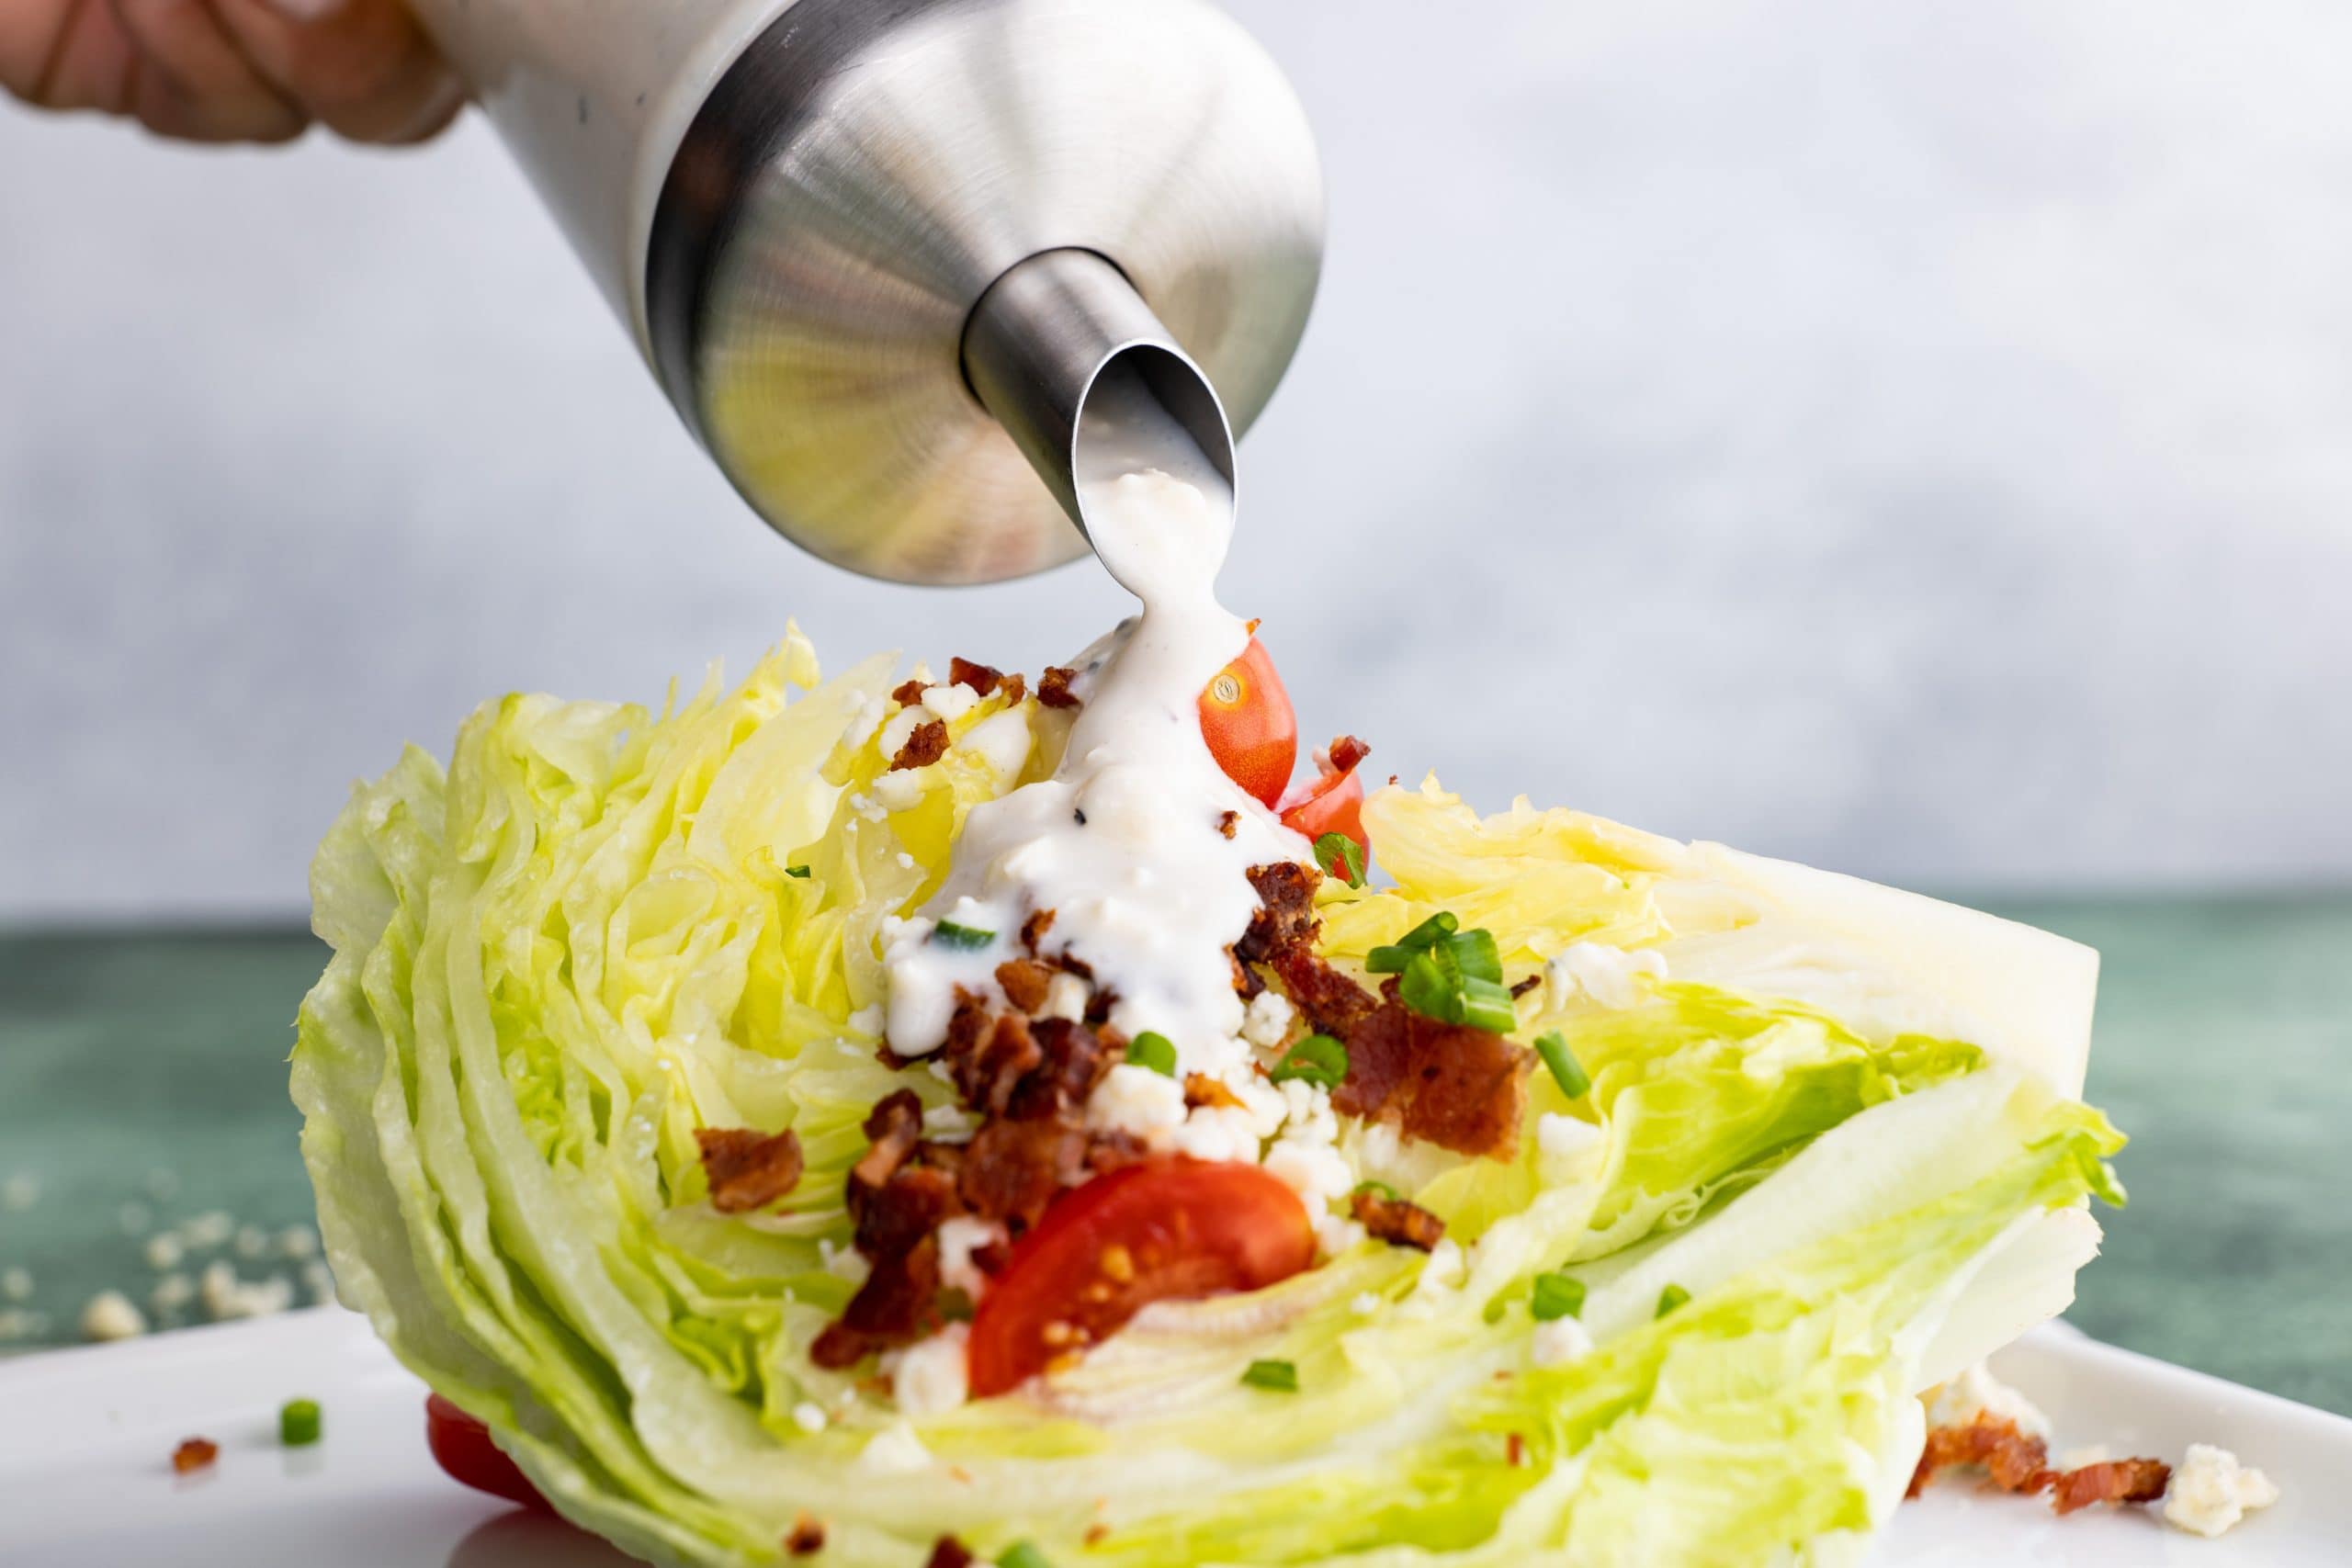 Close view of a hand pouring homemade dressing on an iceberg wedge salad.